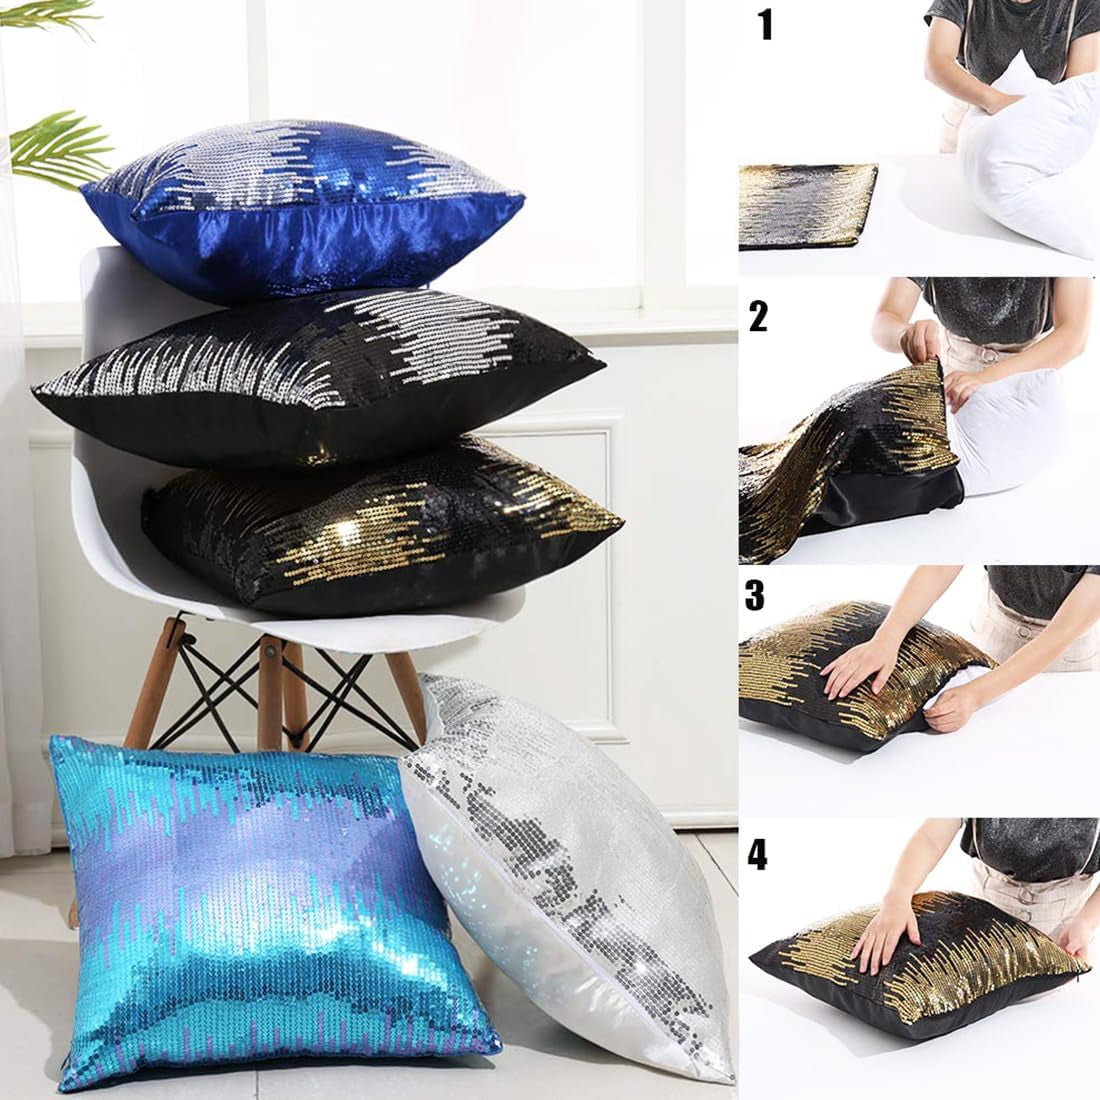 Sequin Pillow Case, Decorative Glitter Pillow Cover for Home Decor Throw Cushion Cover, 18X18 Inches, Black+Silver, Set of 2